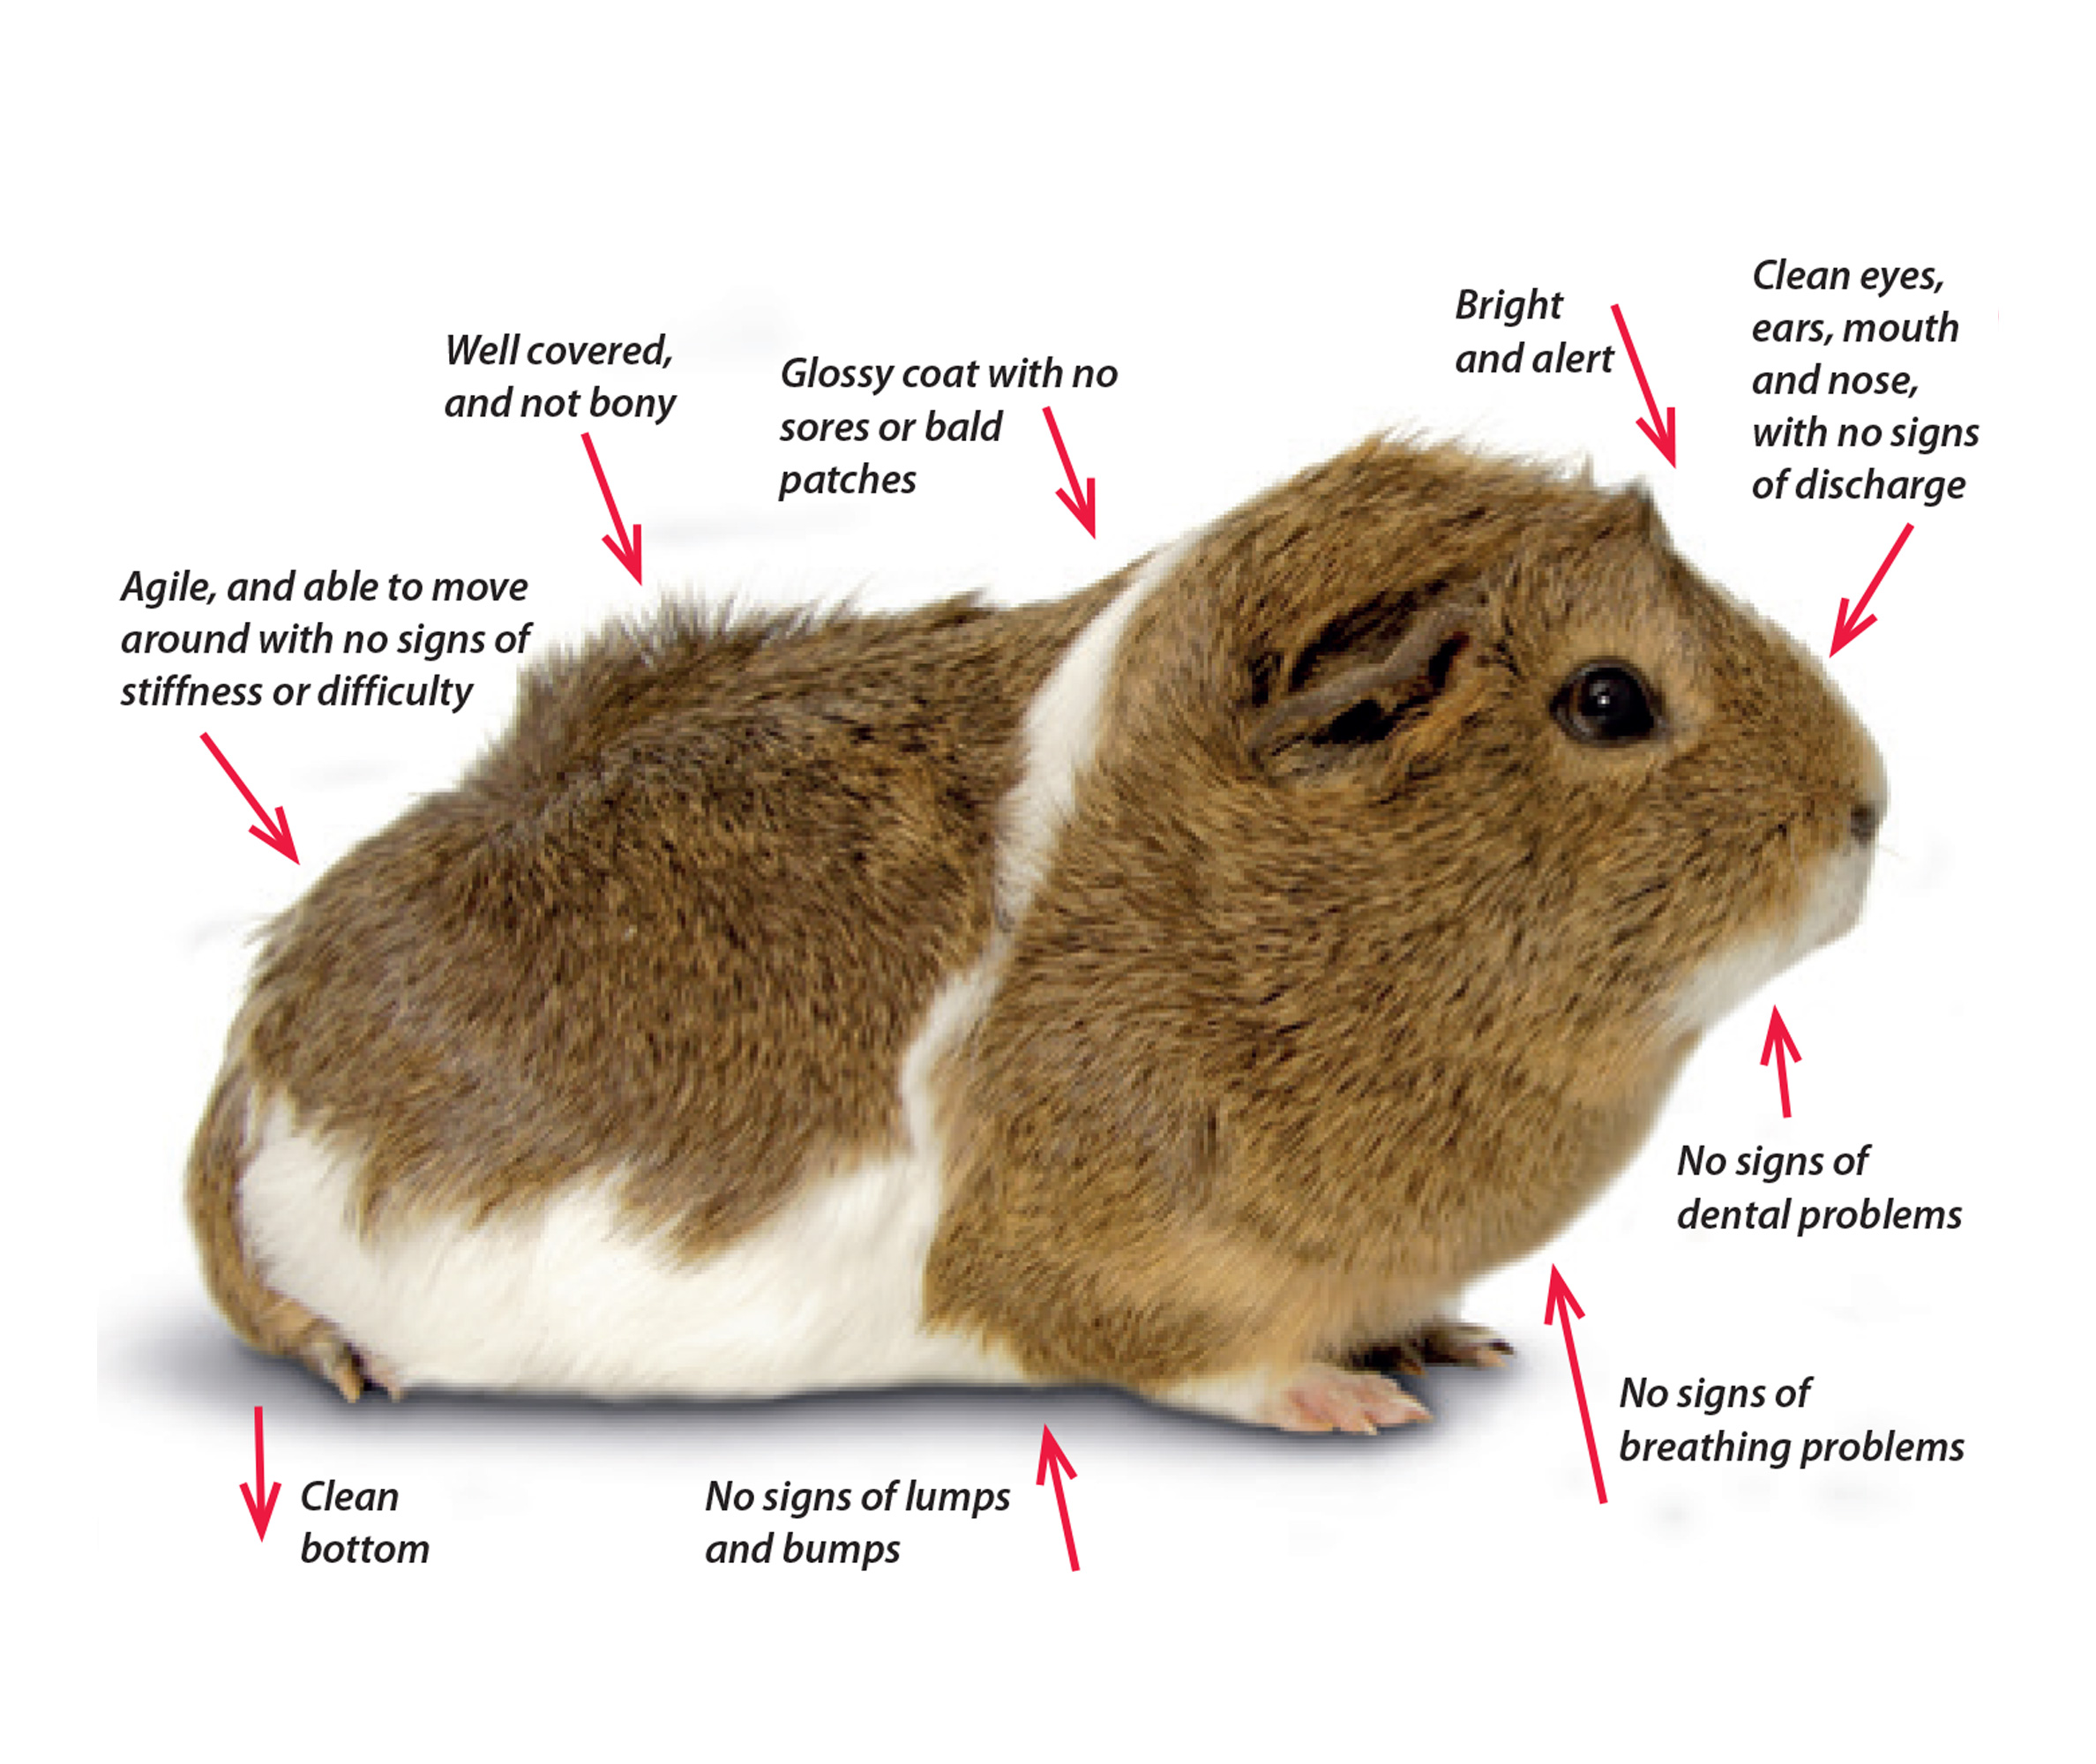 What does a healthy guinea pig look like?